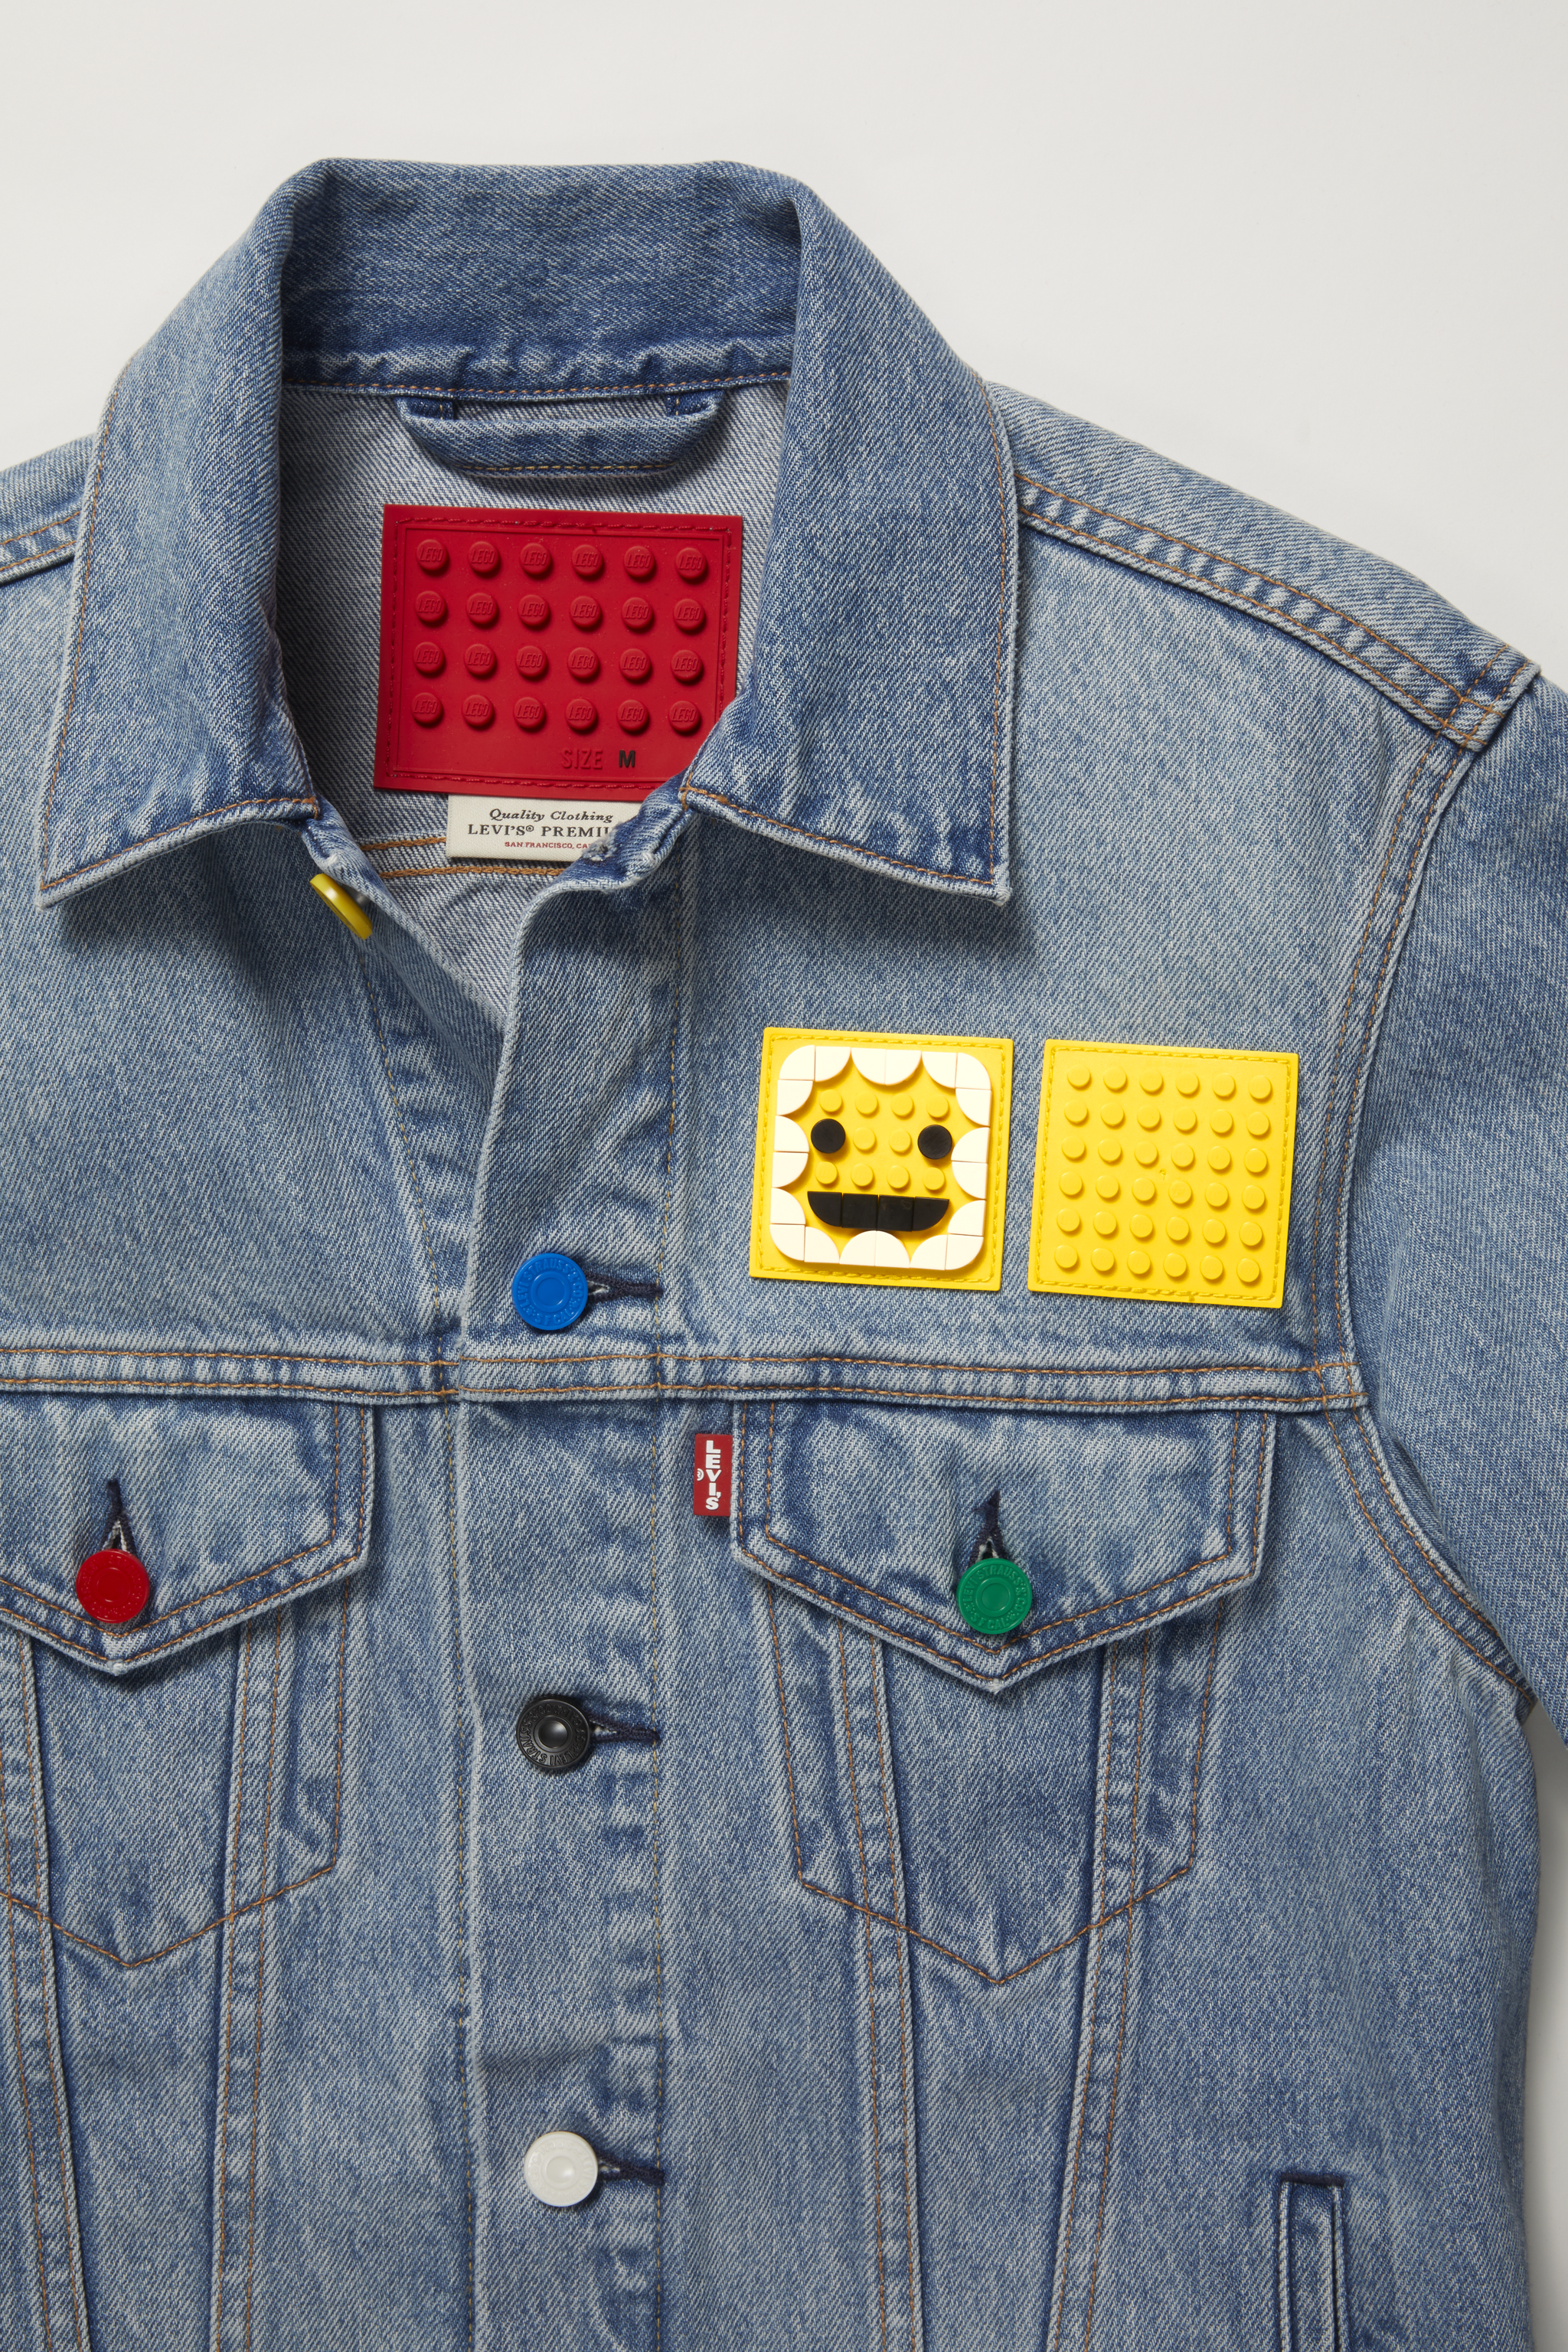 Lego x Levi's Limited-Edition 